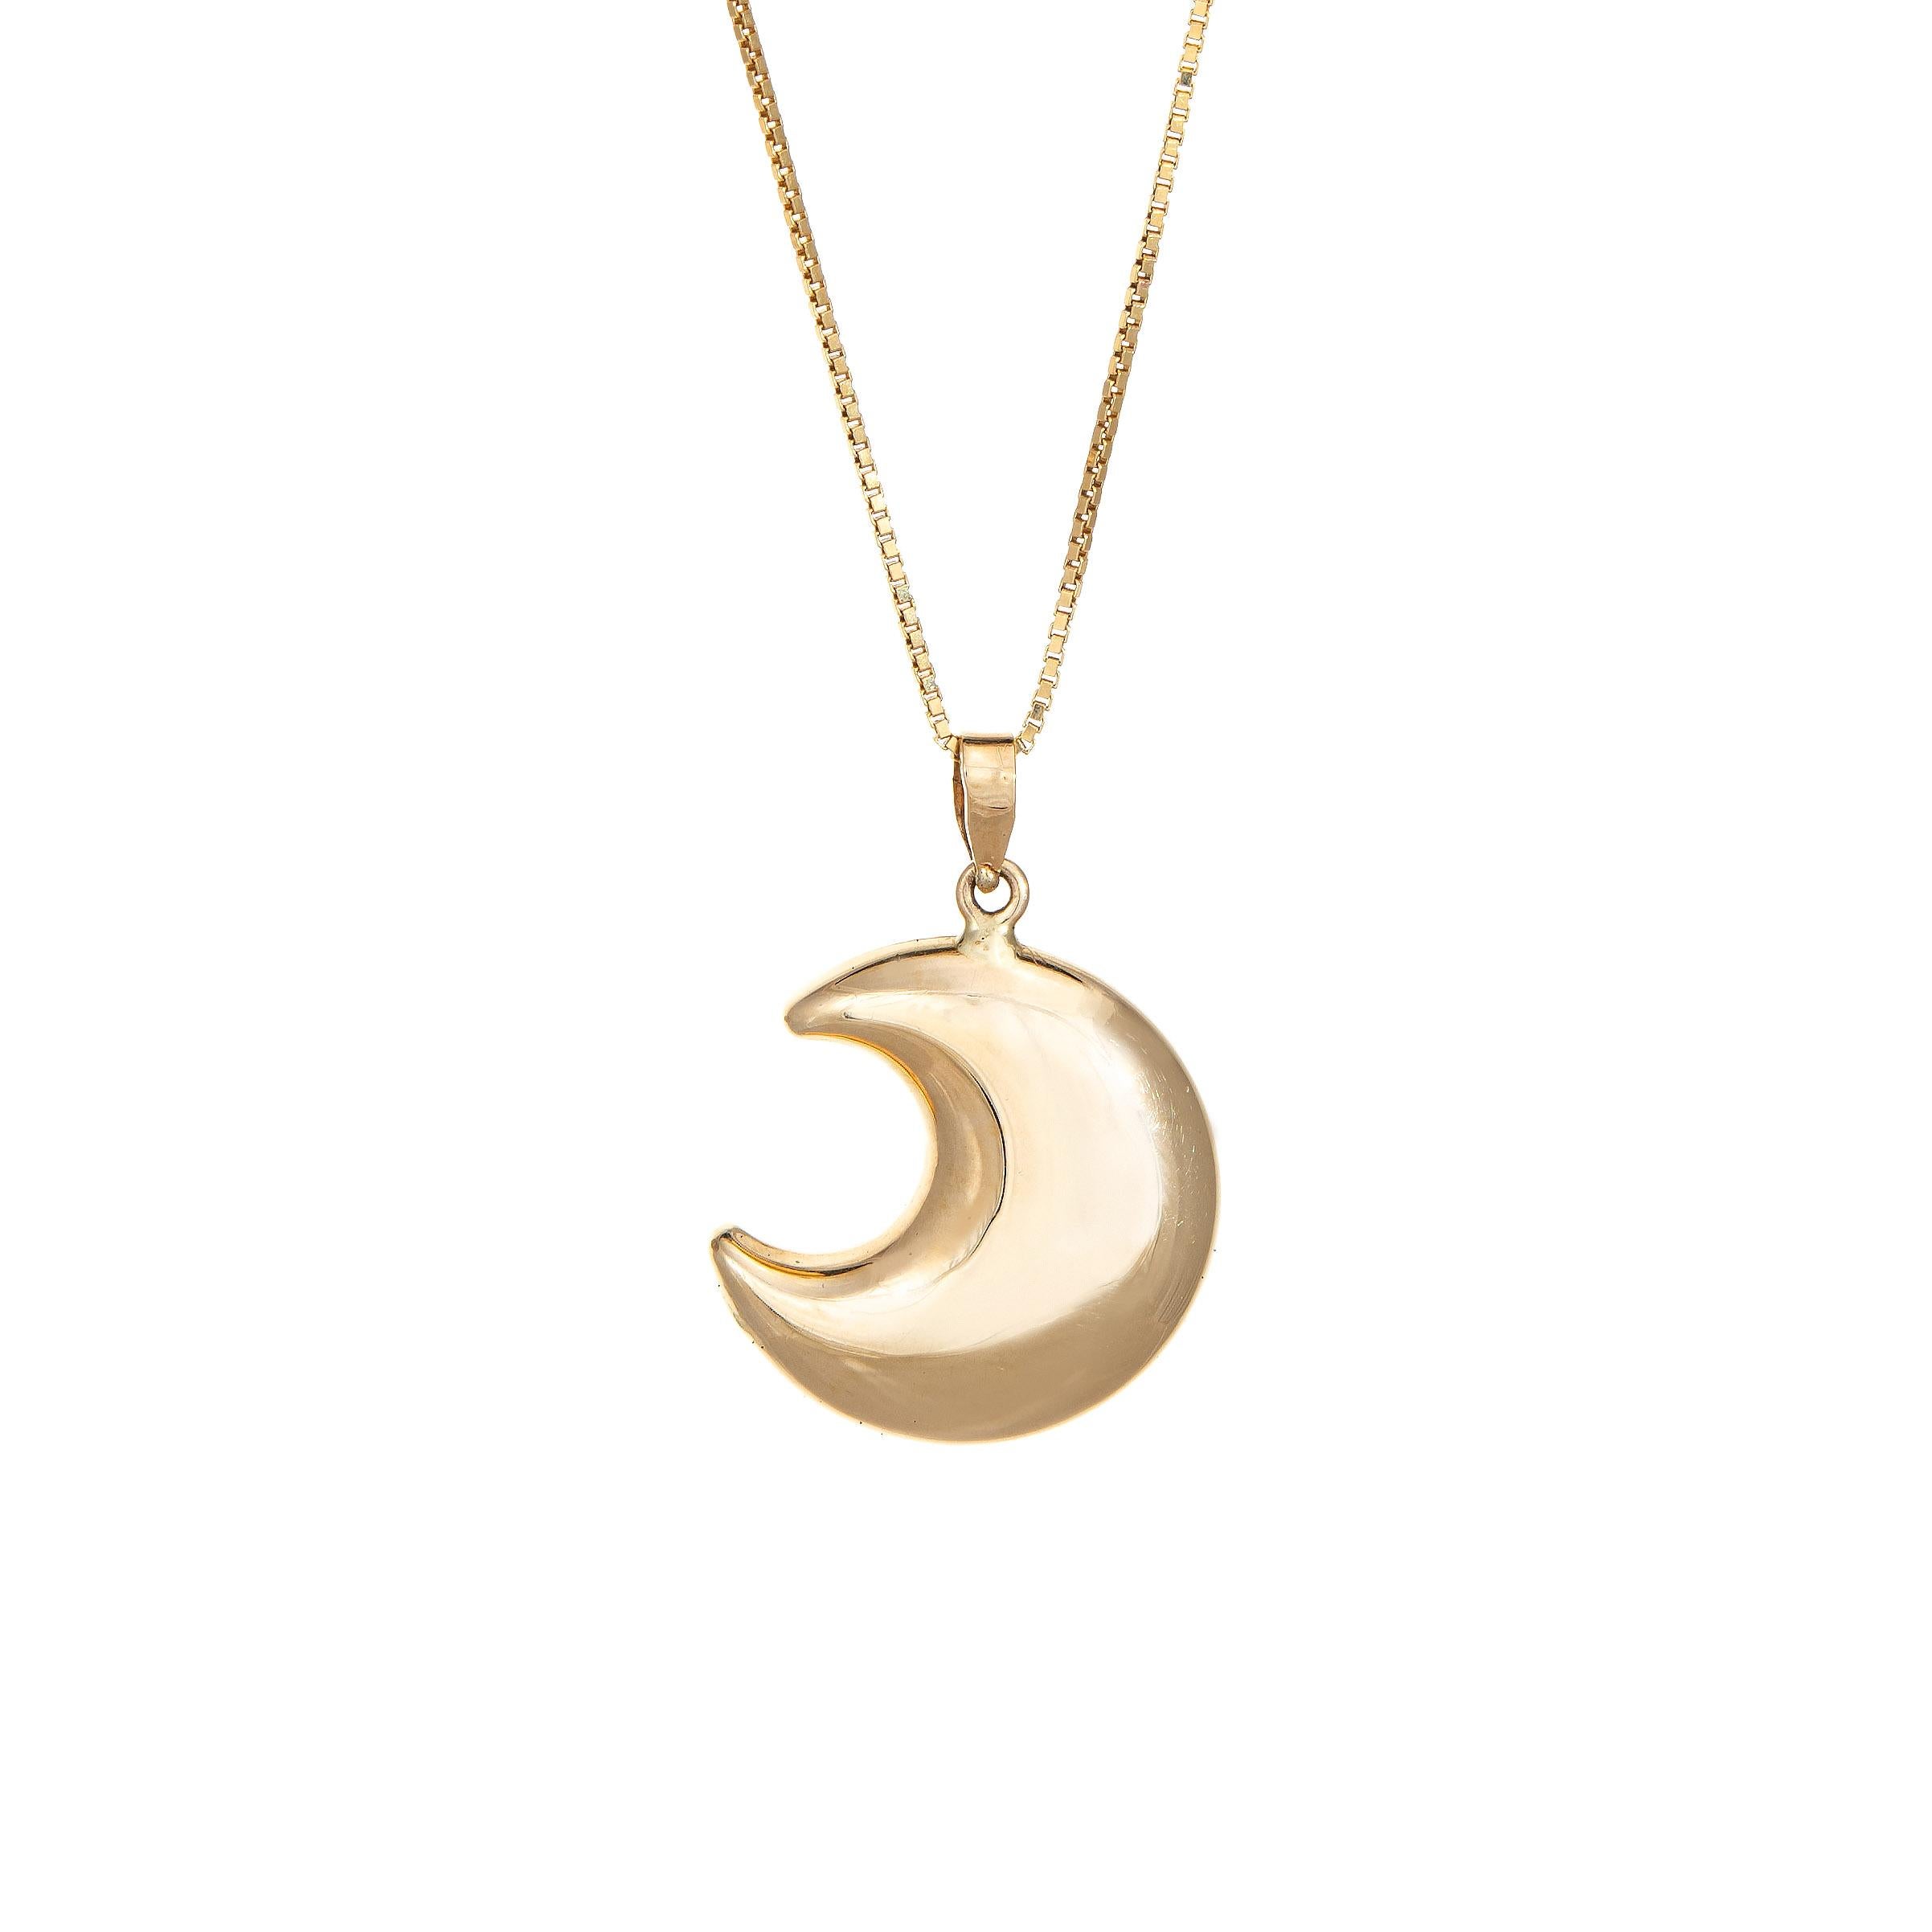 Stylish and finely detailed Man in the Moon necklace crafted in 14 karat yellow gold.  

The ever popular 'Man in the Moon motif is highlighted in the pendant, the face embossed into a cut out moon. The pendant comes with a fine box link 18k yellow